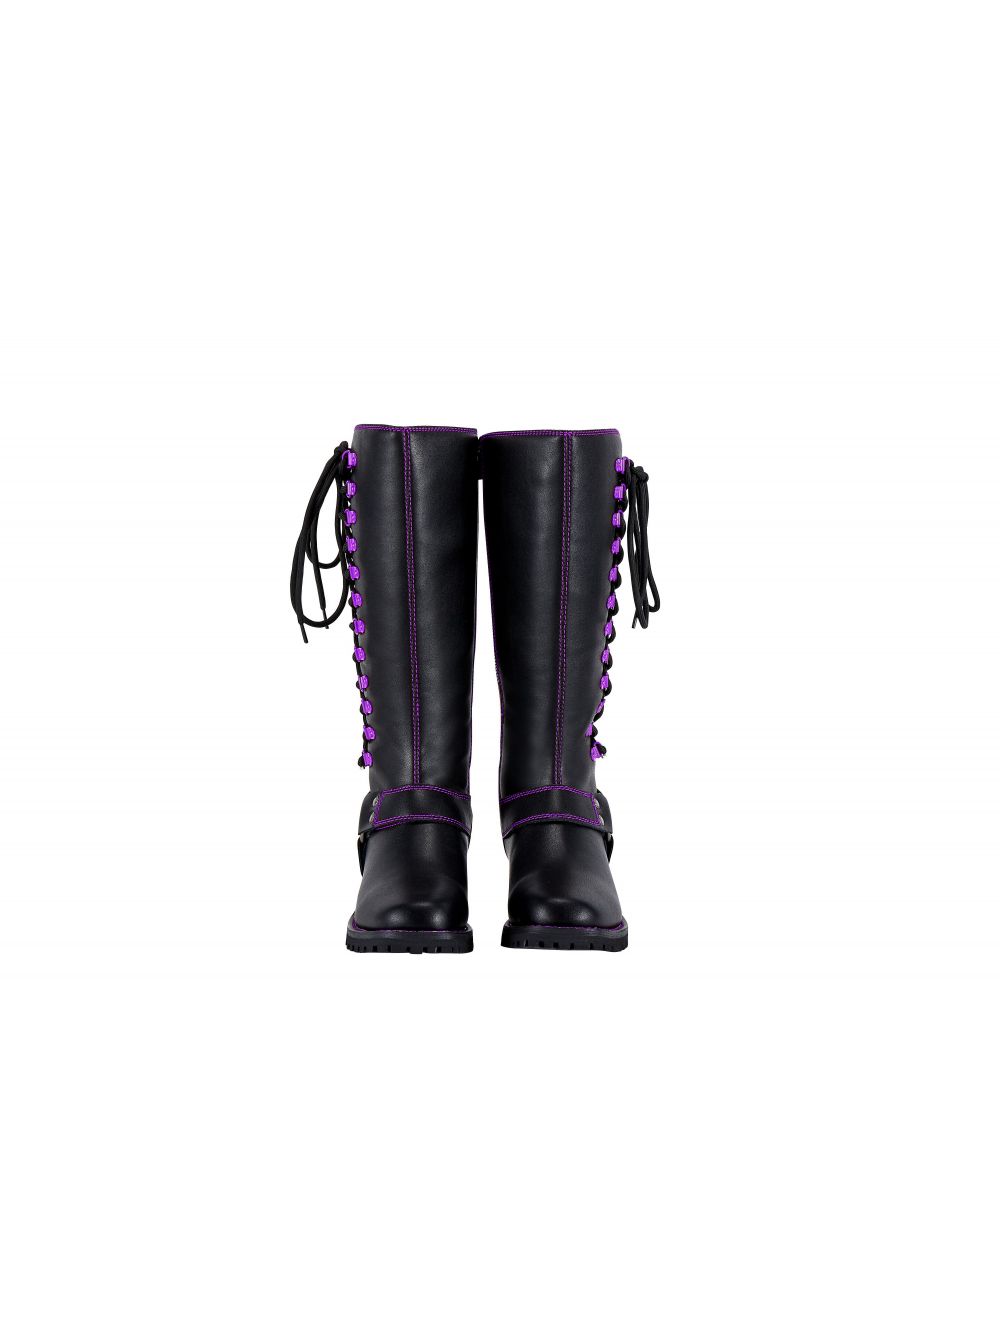 Women's Boots with Purple Stitching & Laces